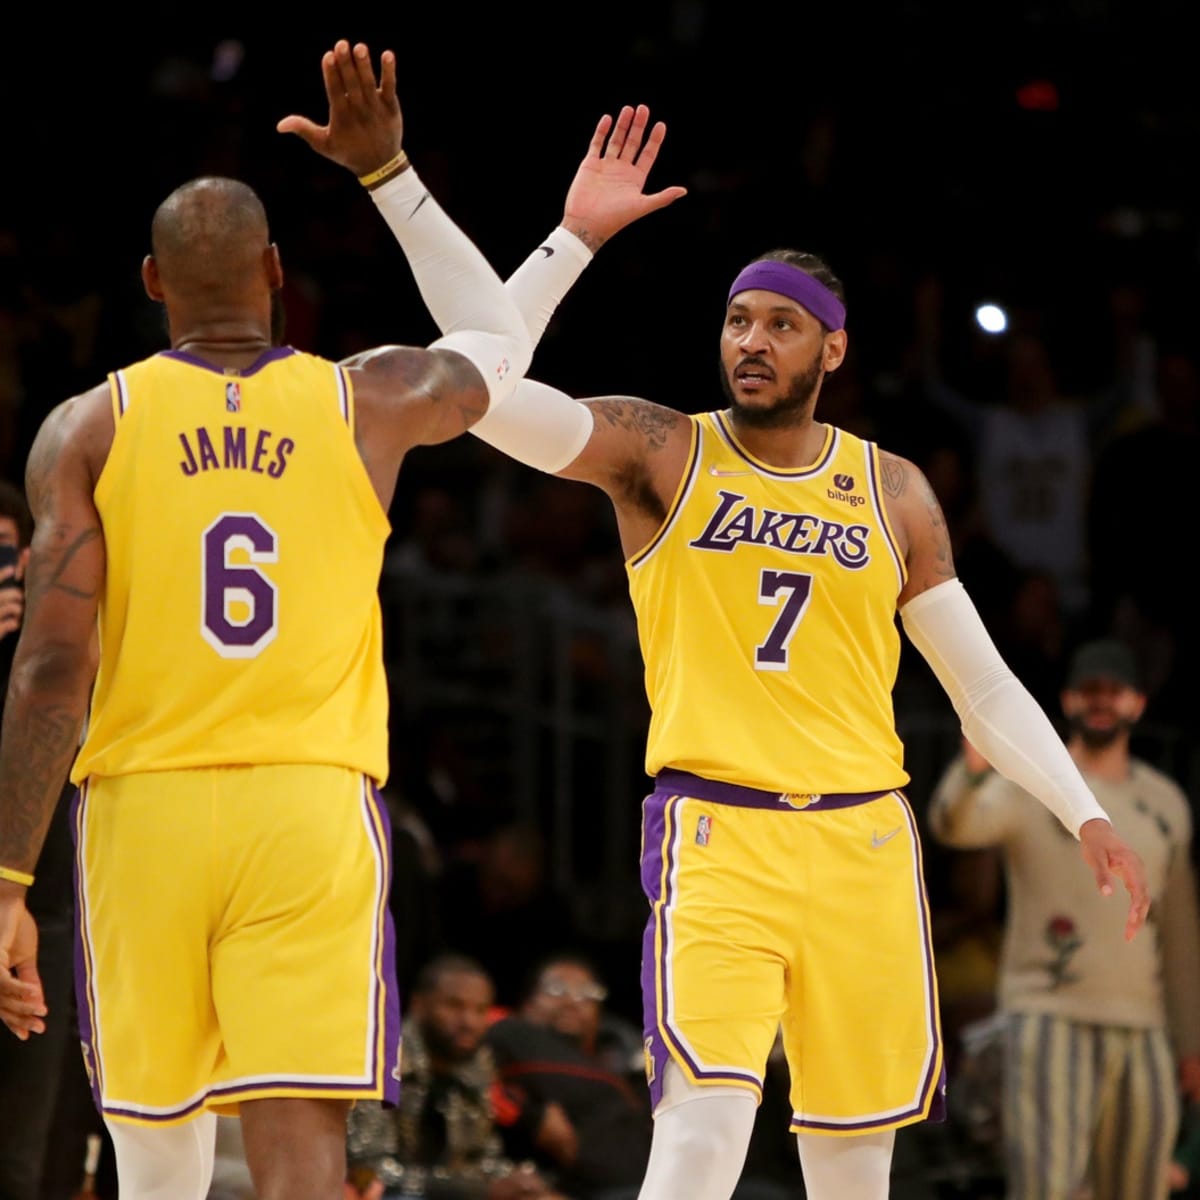 LeBron James Said He Wants to Be a Laker for the Rest of His Life